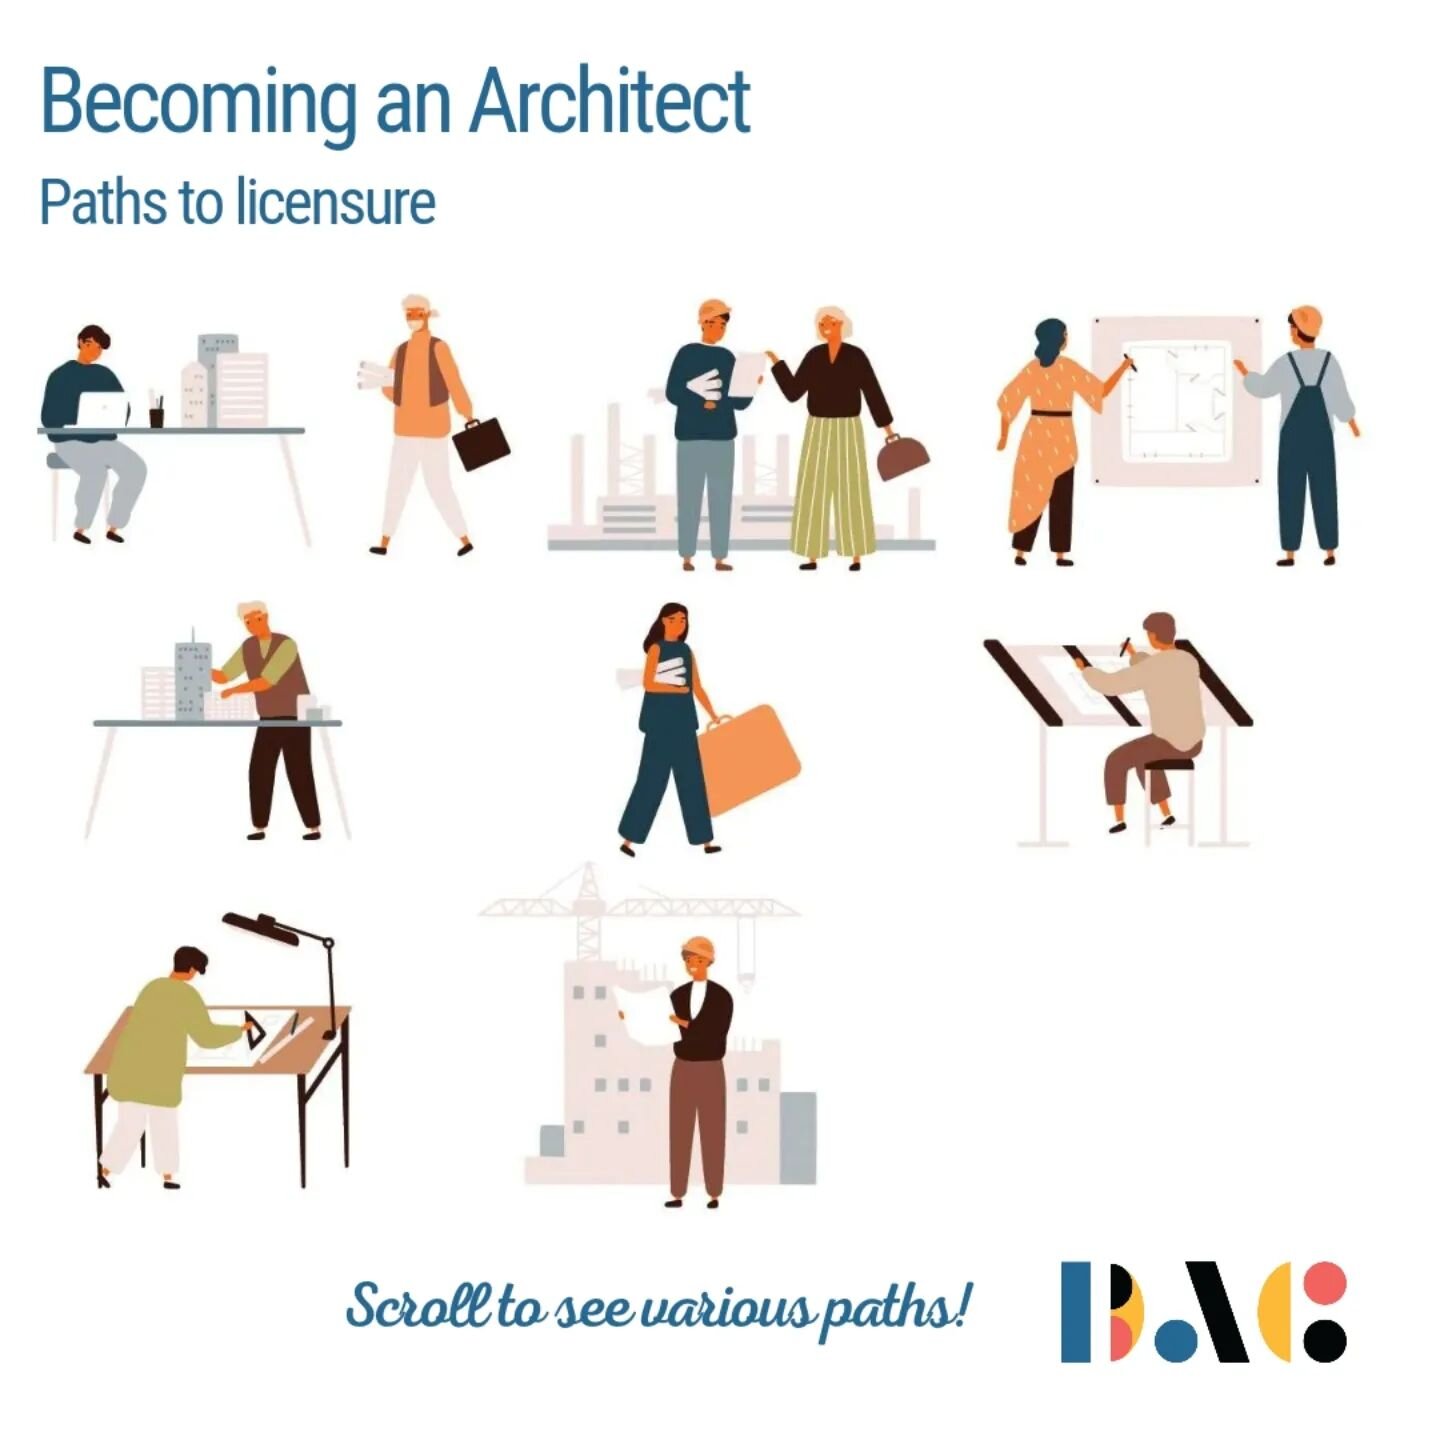 Did you know there are multiple ways to become an architect in Canada? scroll through this post and check out our infographic on our website! (the full document with supplemental info on qualification requirements, etc. is available on our members po